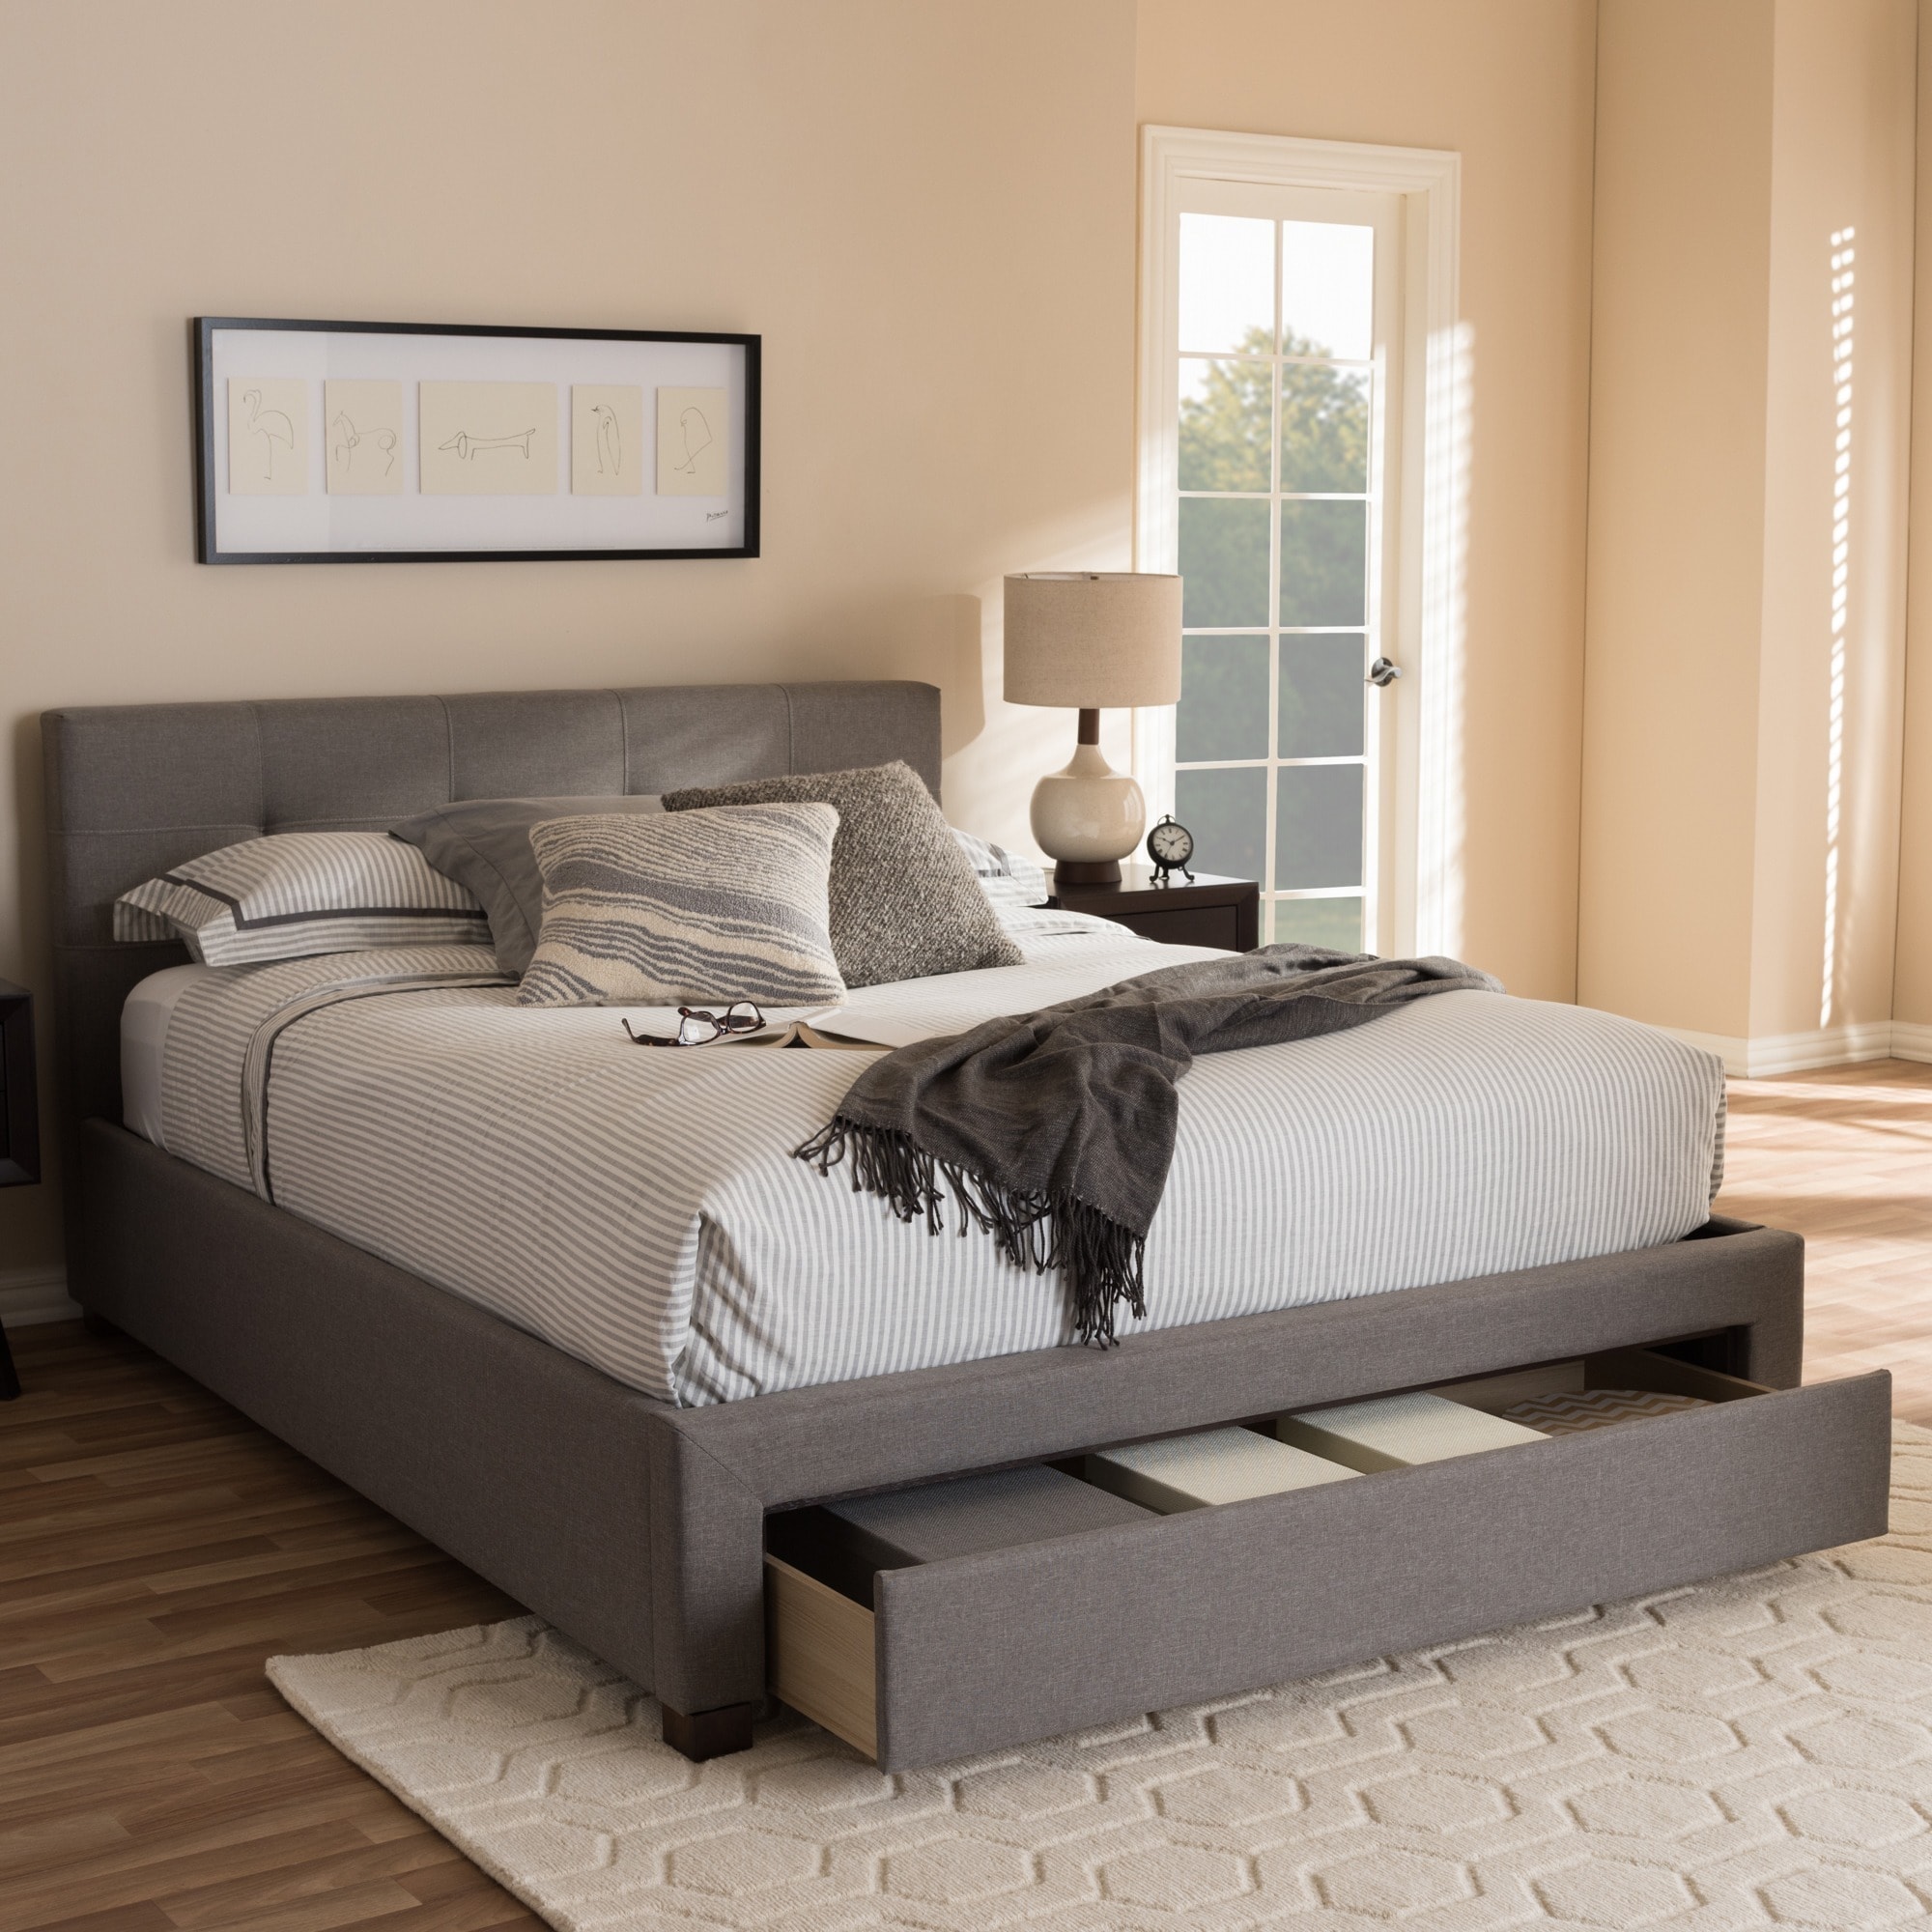 Contemporary Fabric Storage Platform Bed By Baxton Studio On Sale Overstock 12808207